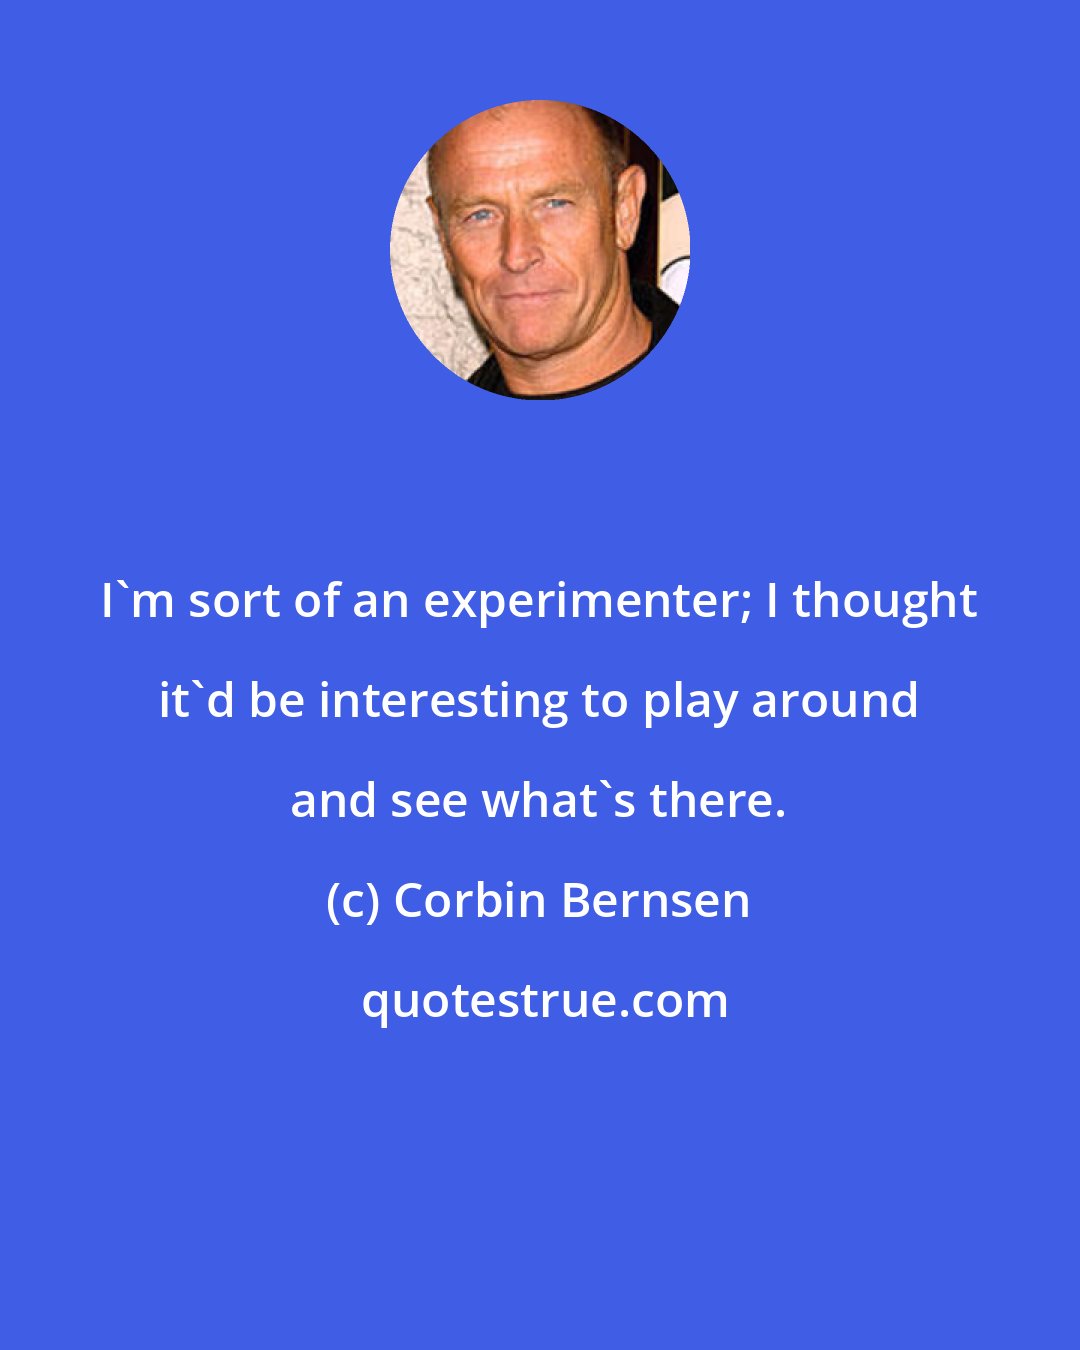 Corbin Bernsen: I'm sort of an experimenter; I thought it'd be interesting to play around and see what's there.